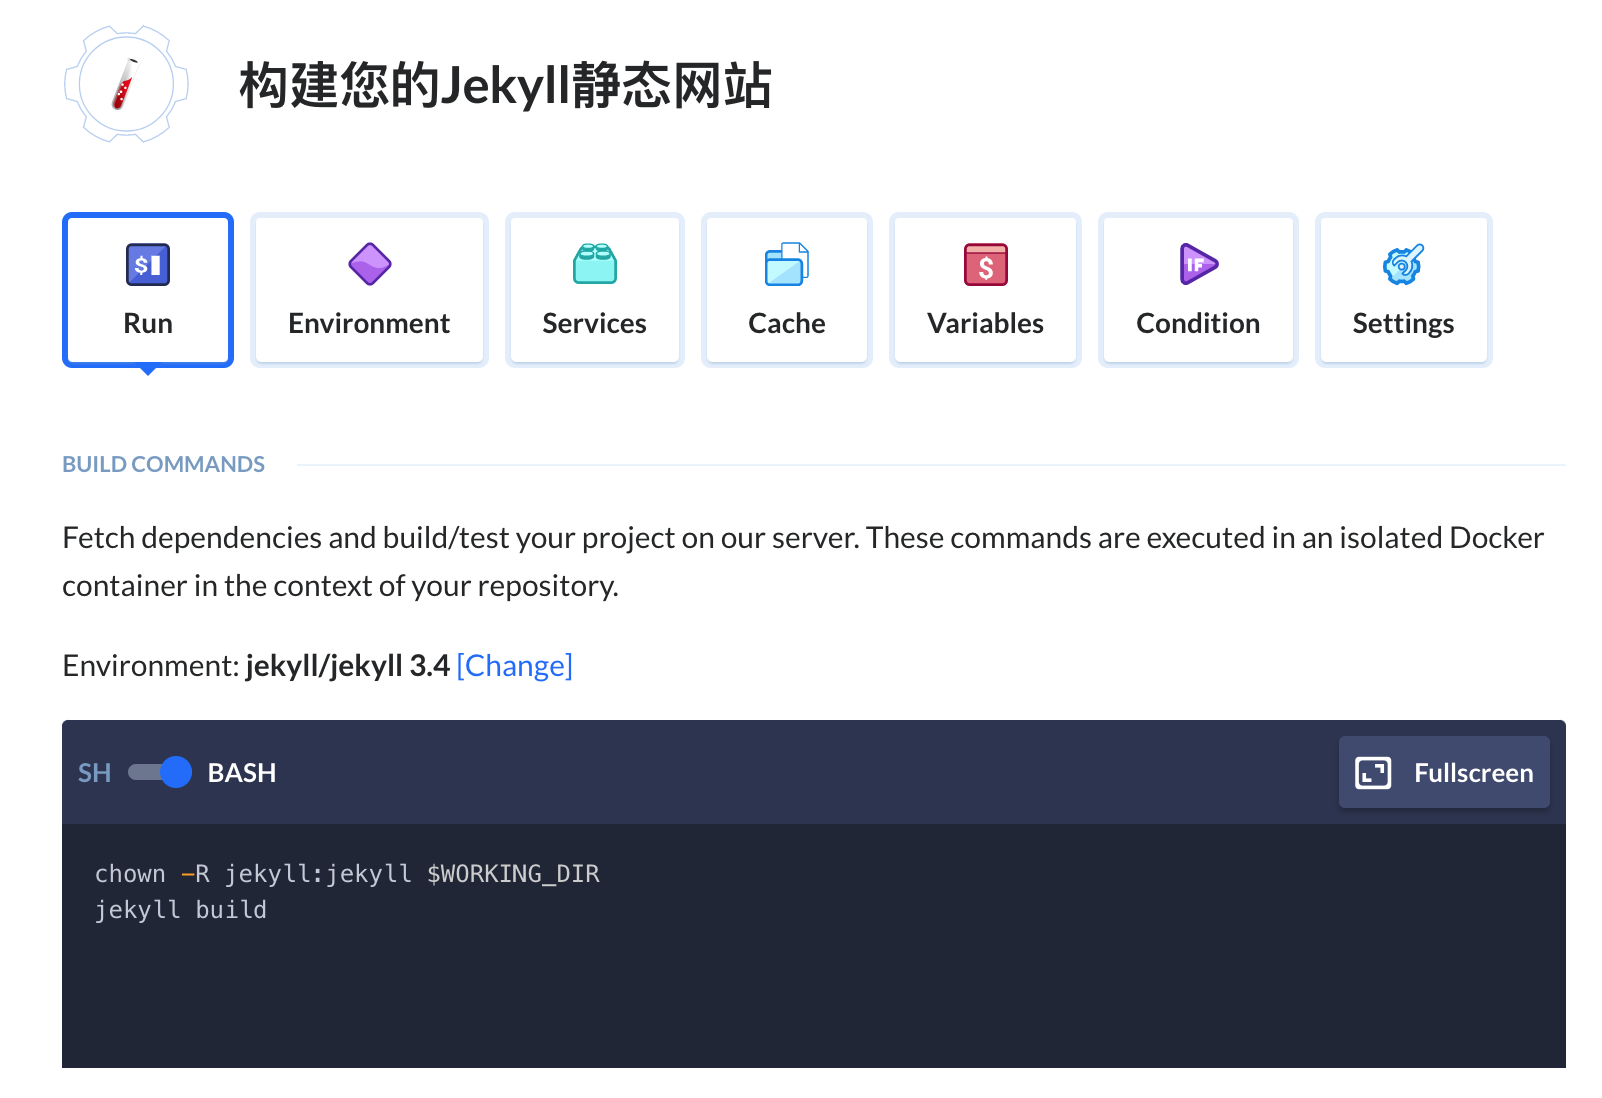 Default build commands for Jekyll